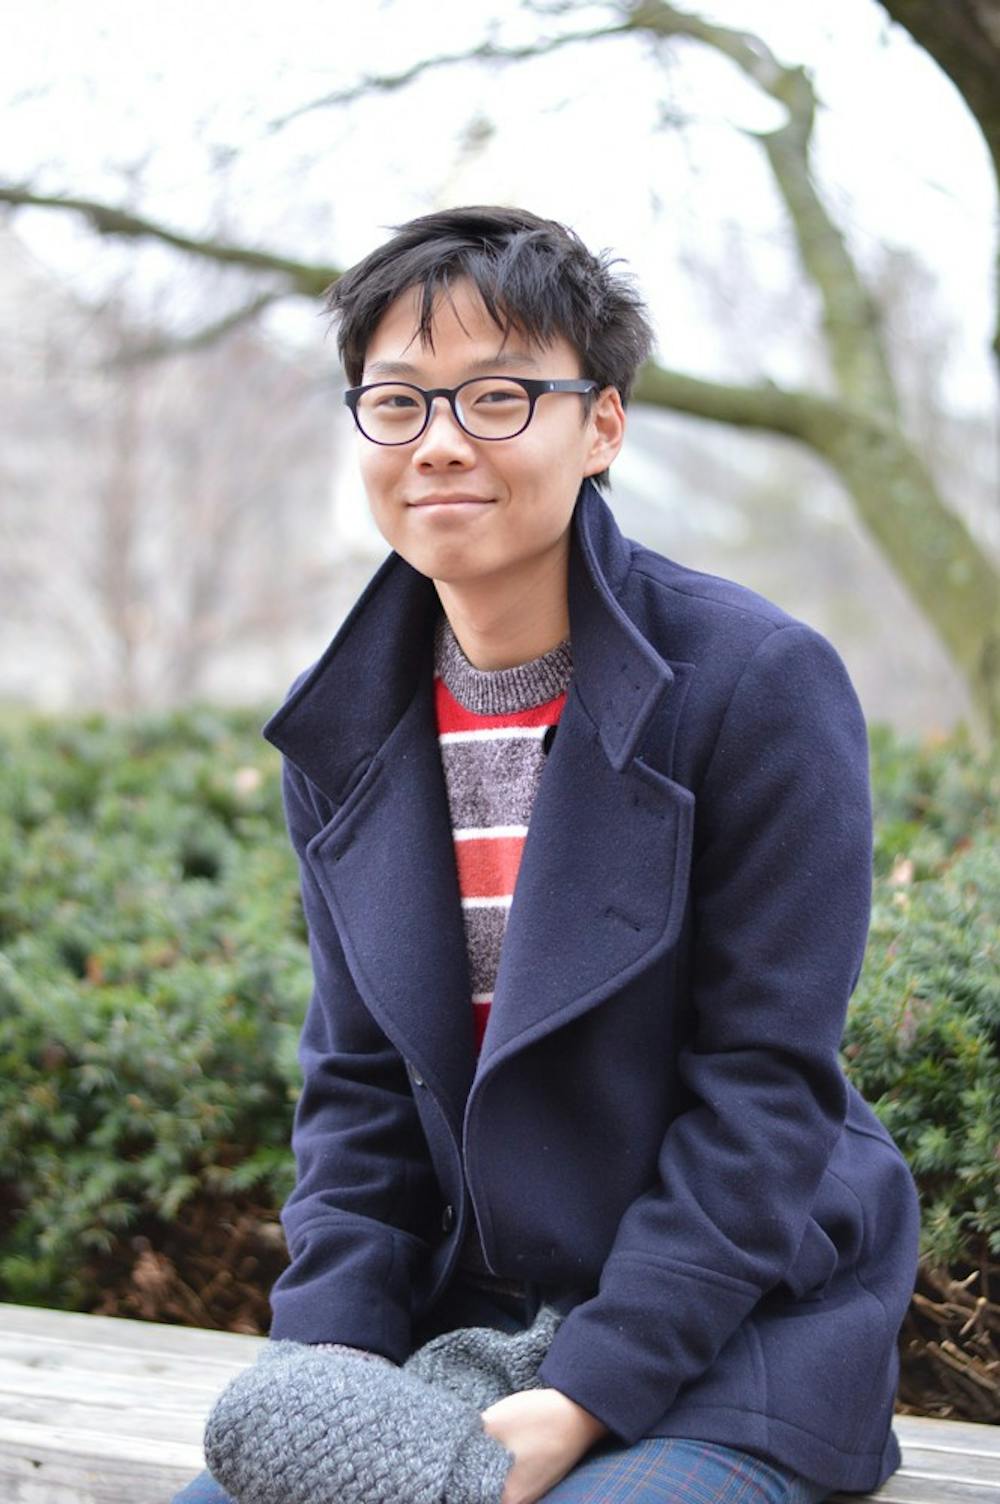 Sophomore Paul Yoon moved with his family to the United States from South Korea and is still in the process of becoming an American citizen.